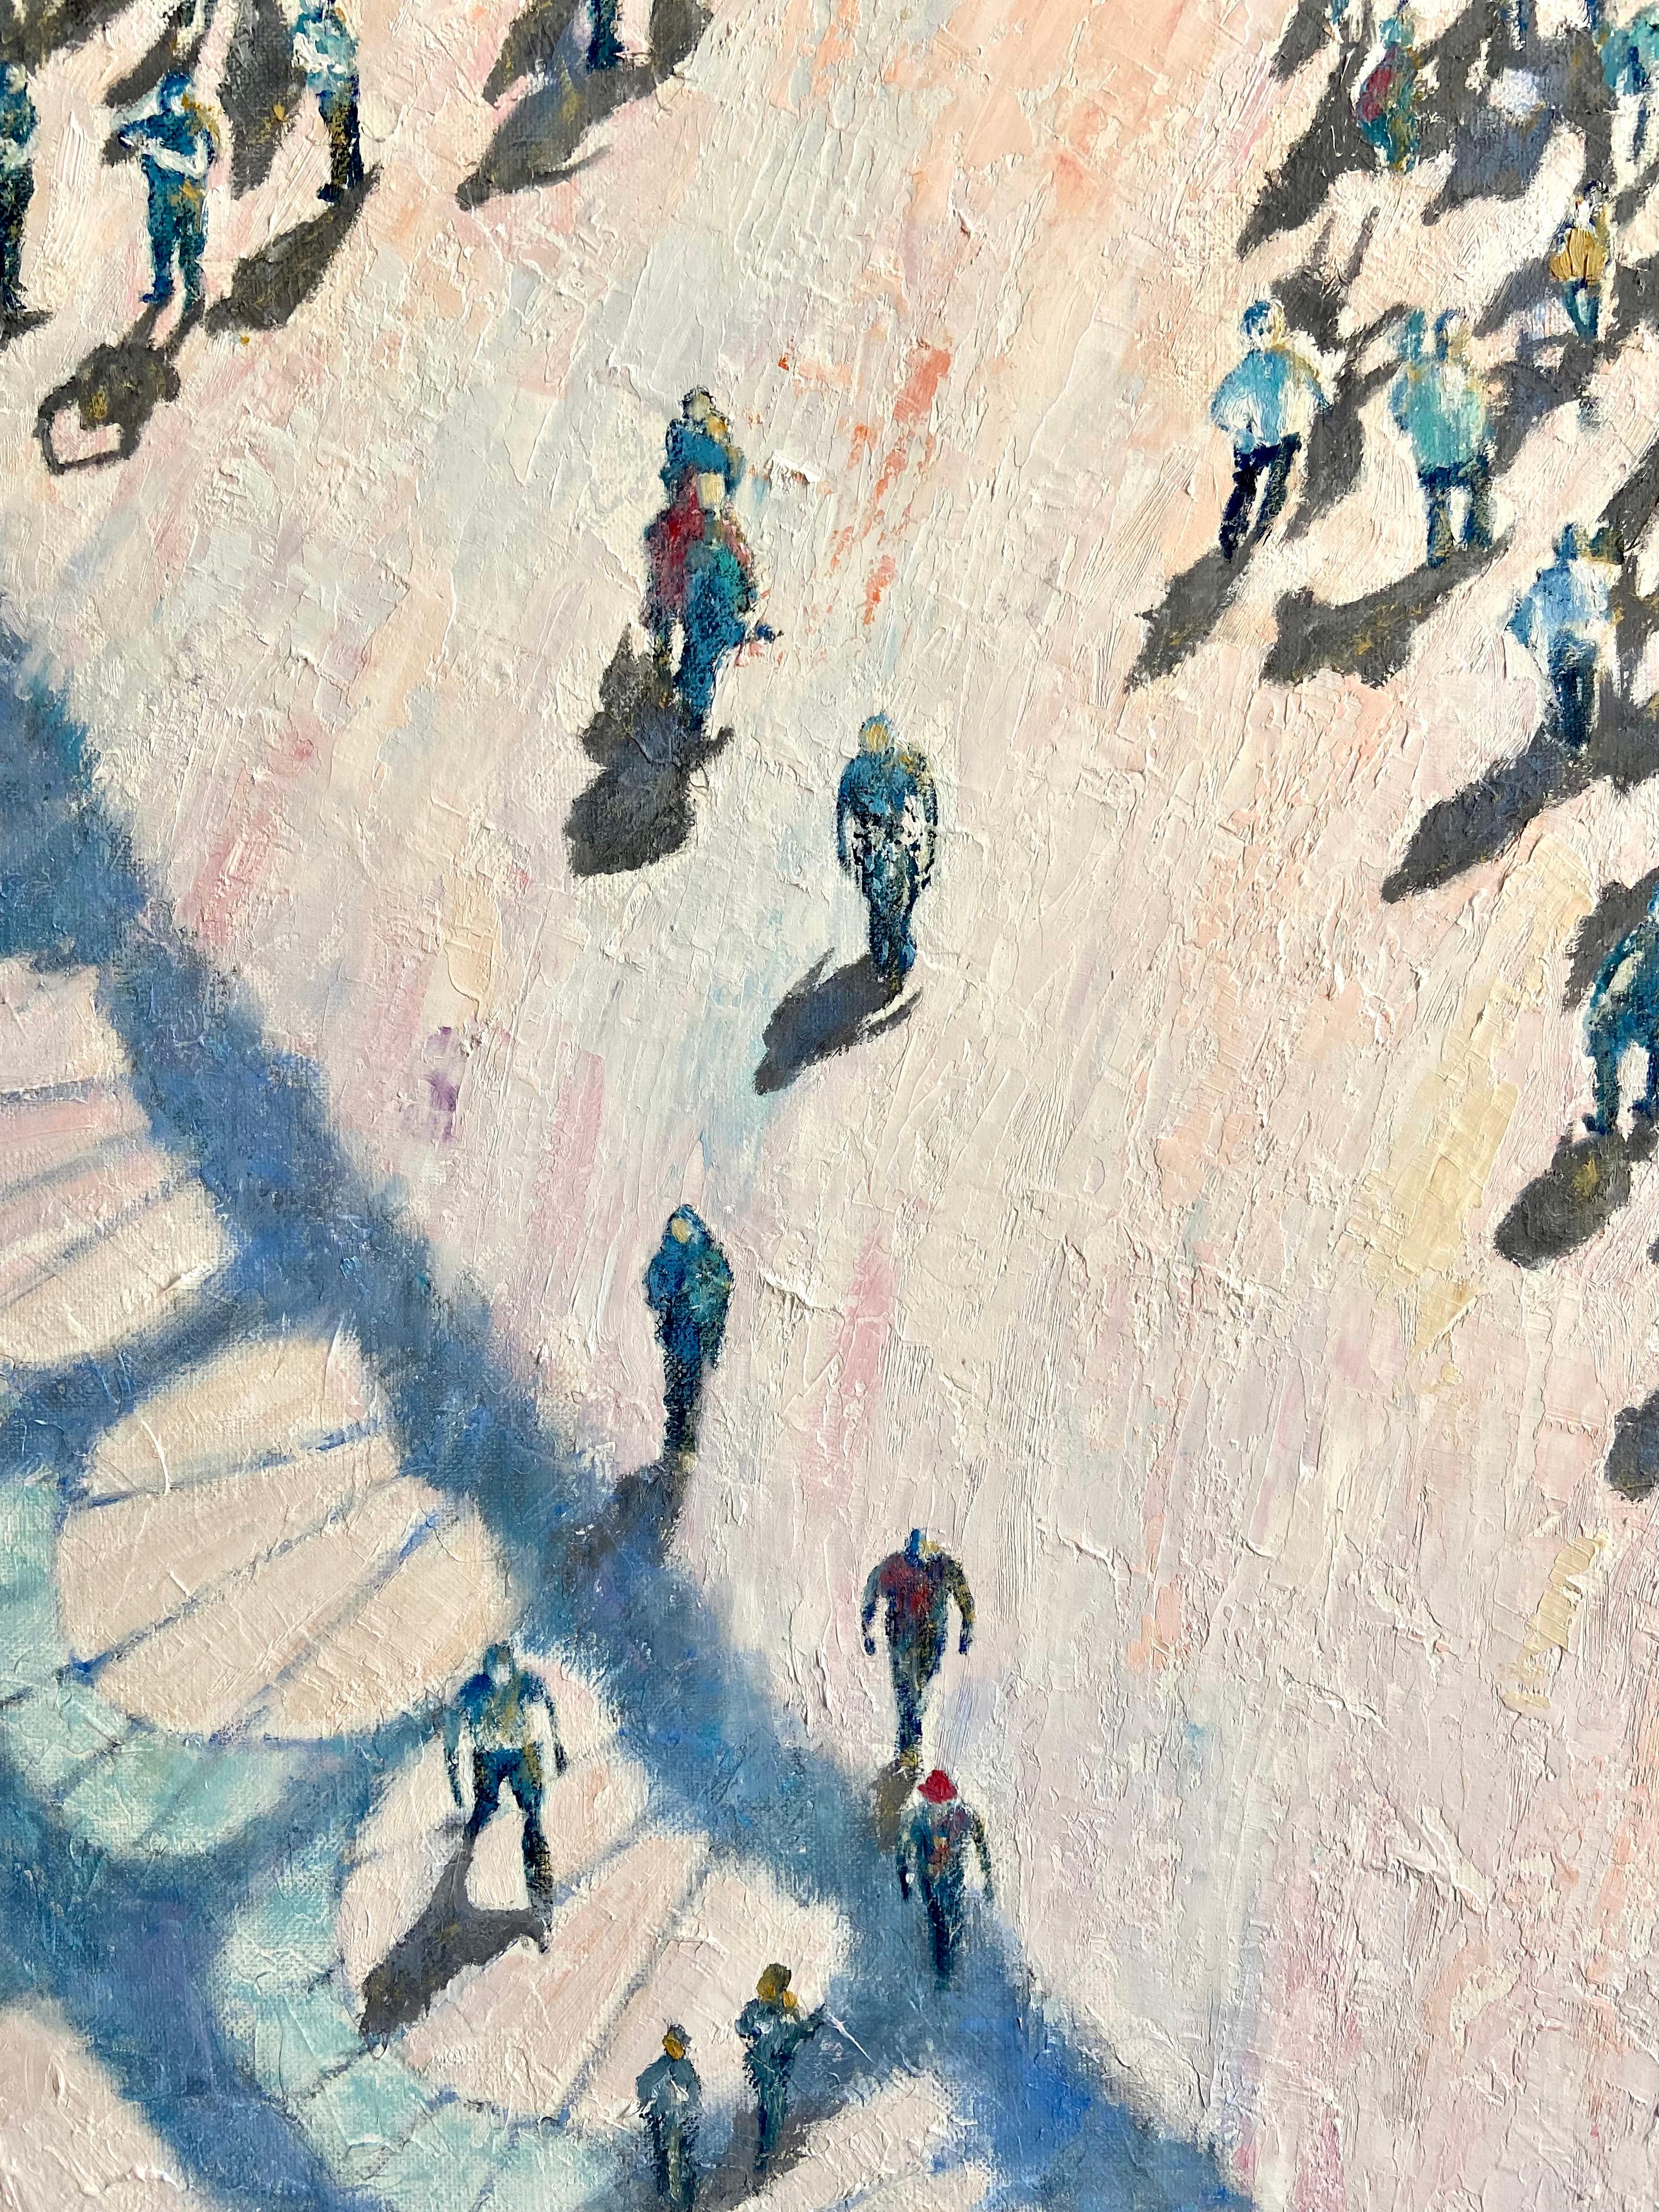 Shadows & Light Paris gives the spectator a birds eye perspective of the Eiffel tower's first floor; the cast shadow of the building with the visitor's standing in line for the ticket office. The painting is executed in rich layered oil paint in